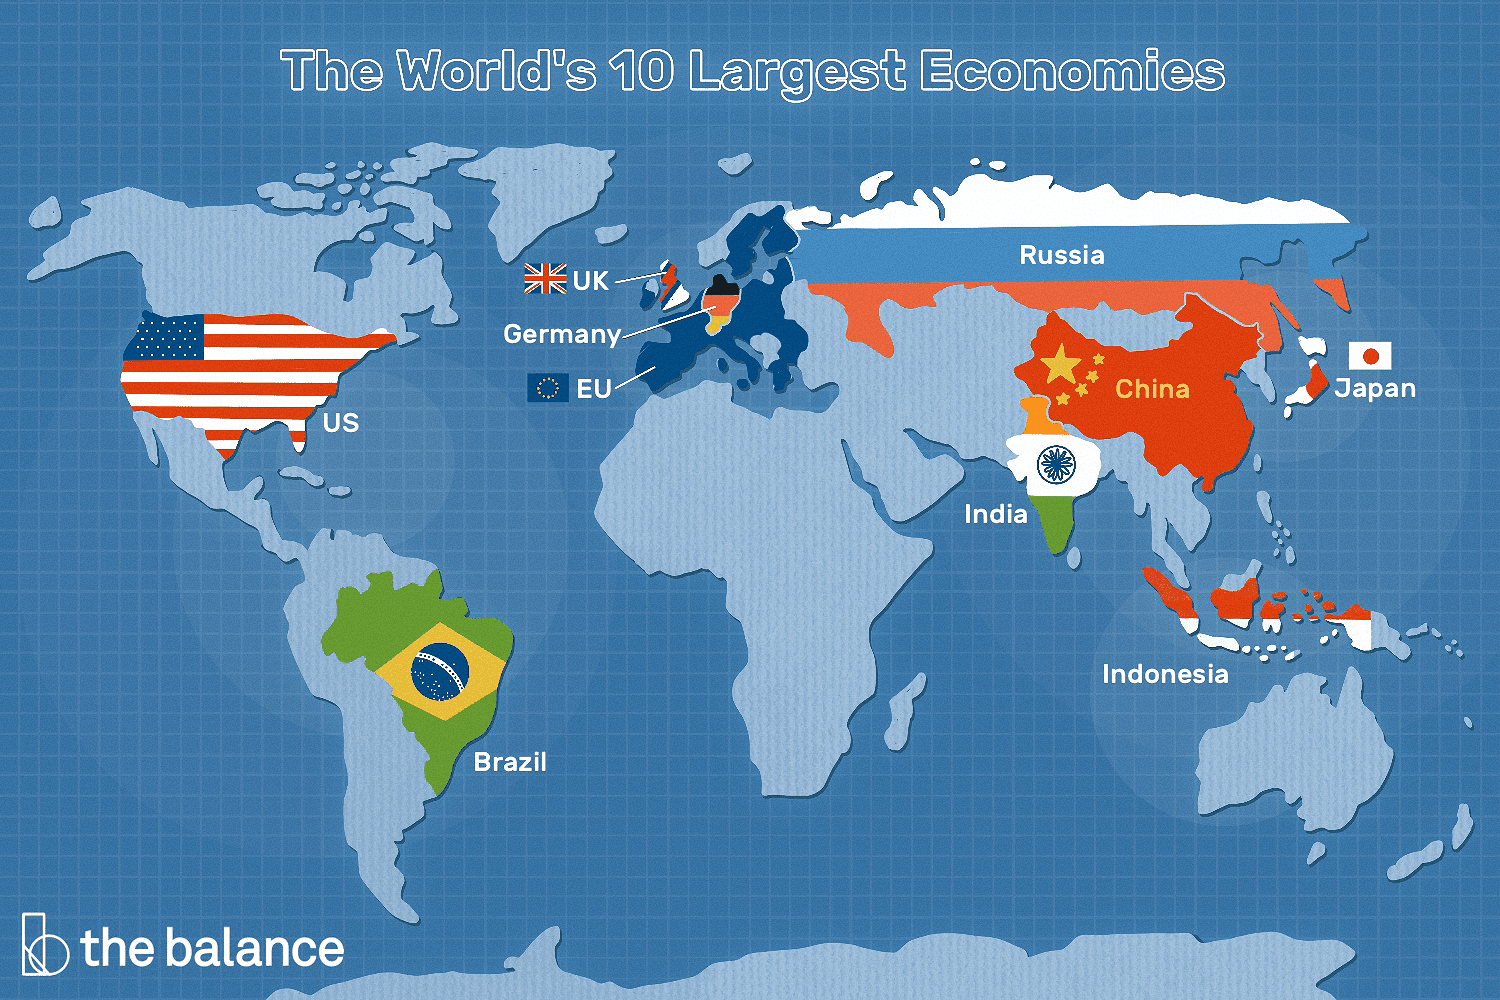 This illustration shows a world map highlighting the 10 Largest Economies including "US," "Brazil," "UK," "Germany," "EU," "Russia," "China," "India," "Indonesia," and "Japan